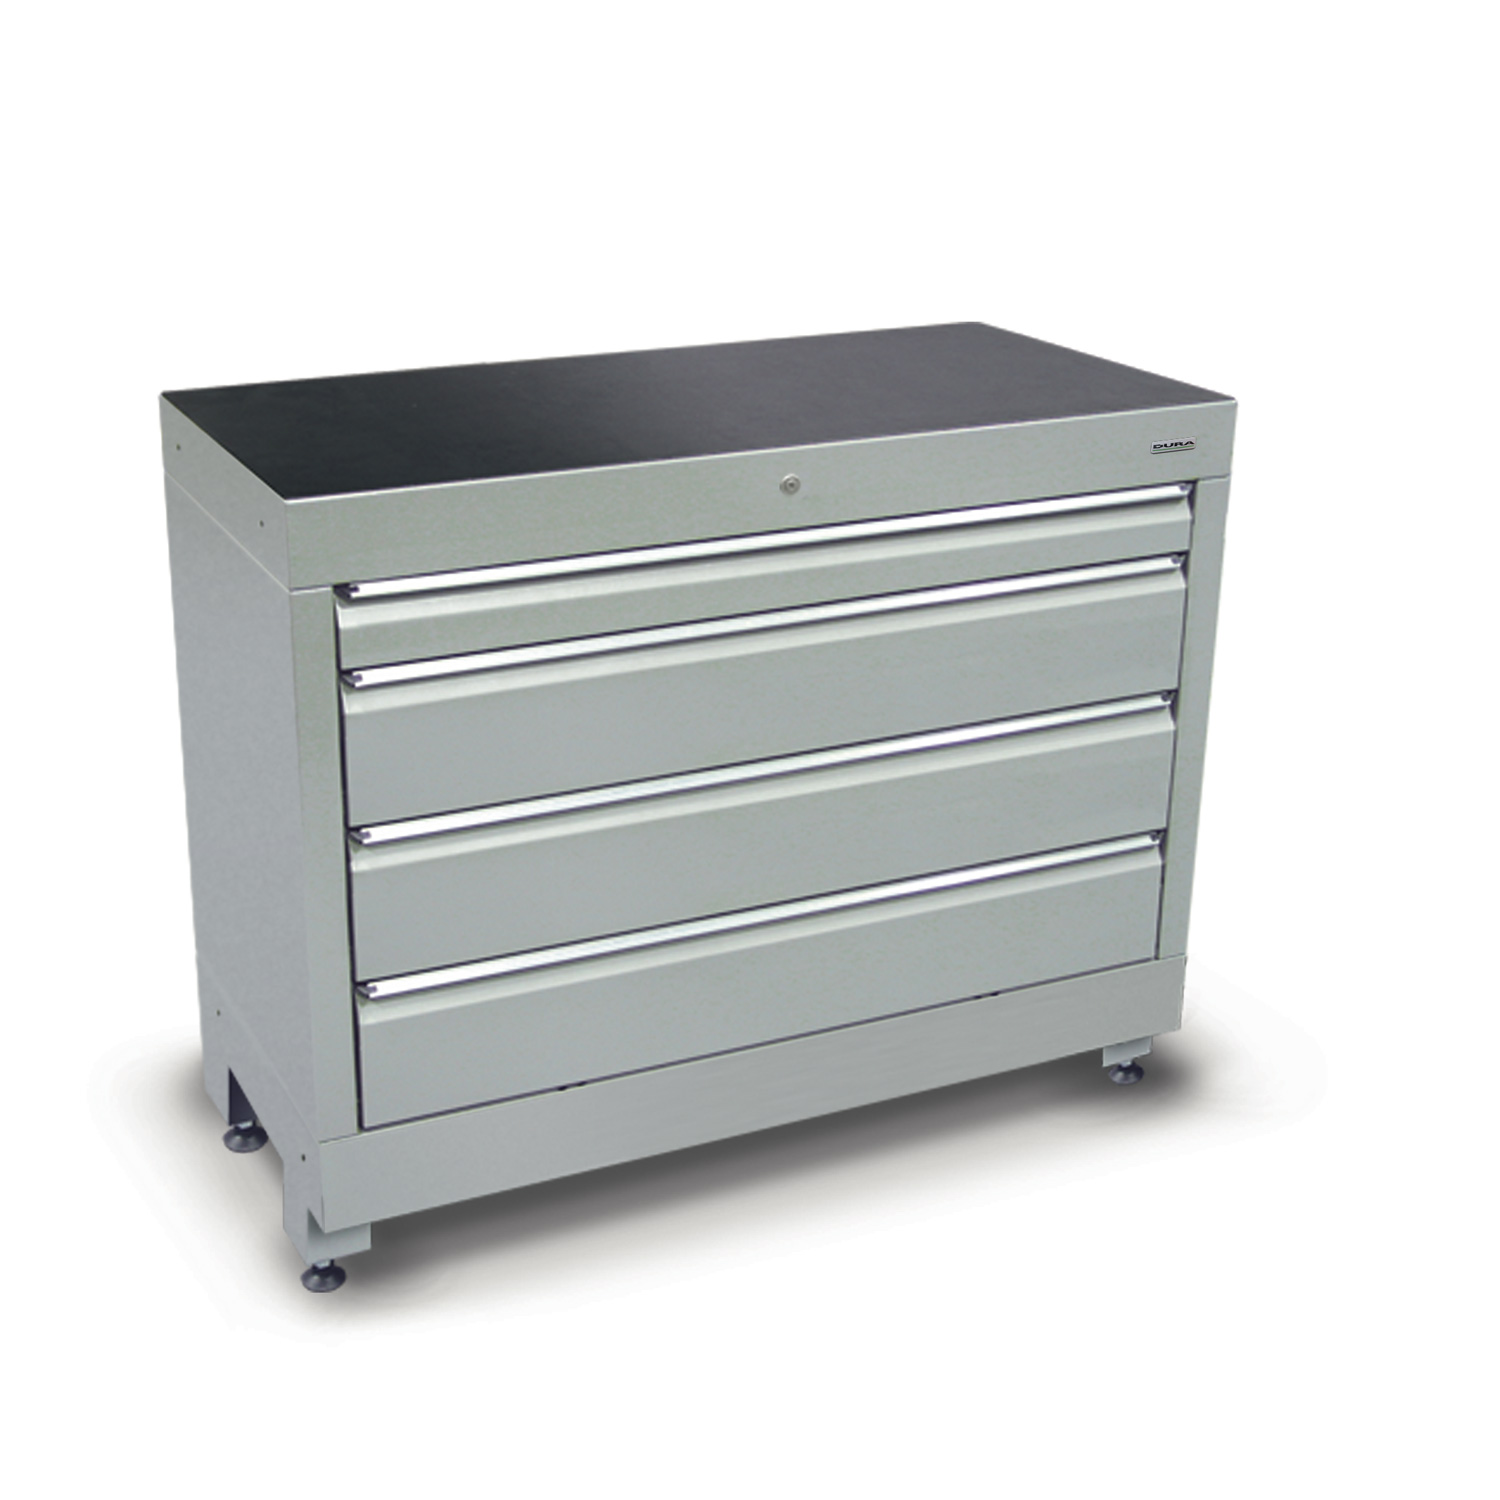 1200 series tool cabinet with an additional inner sliding tray (4 drawers)